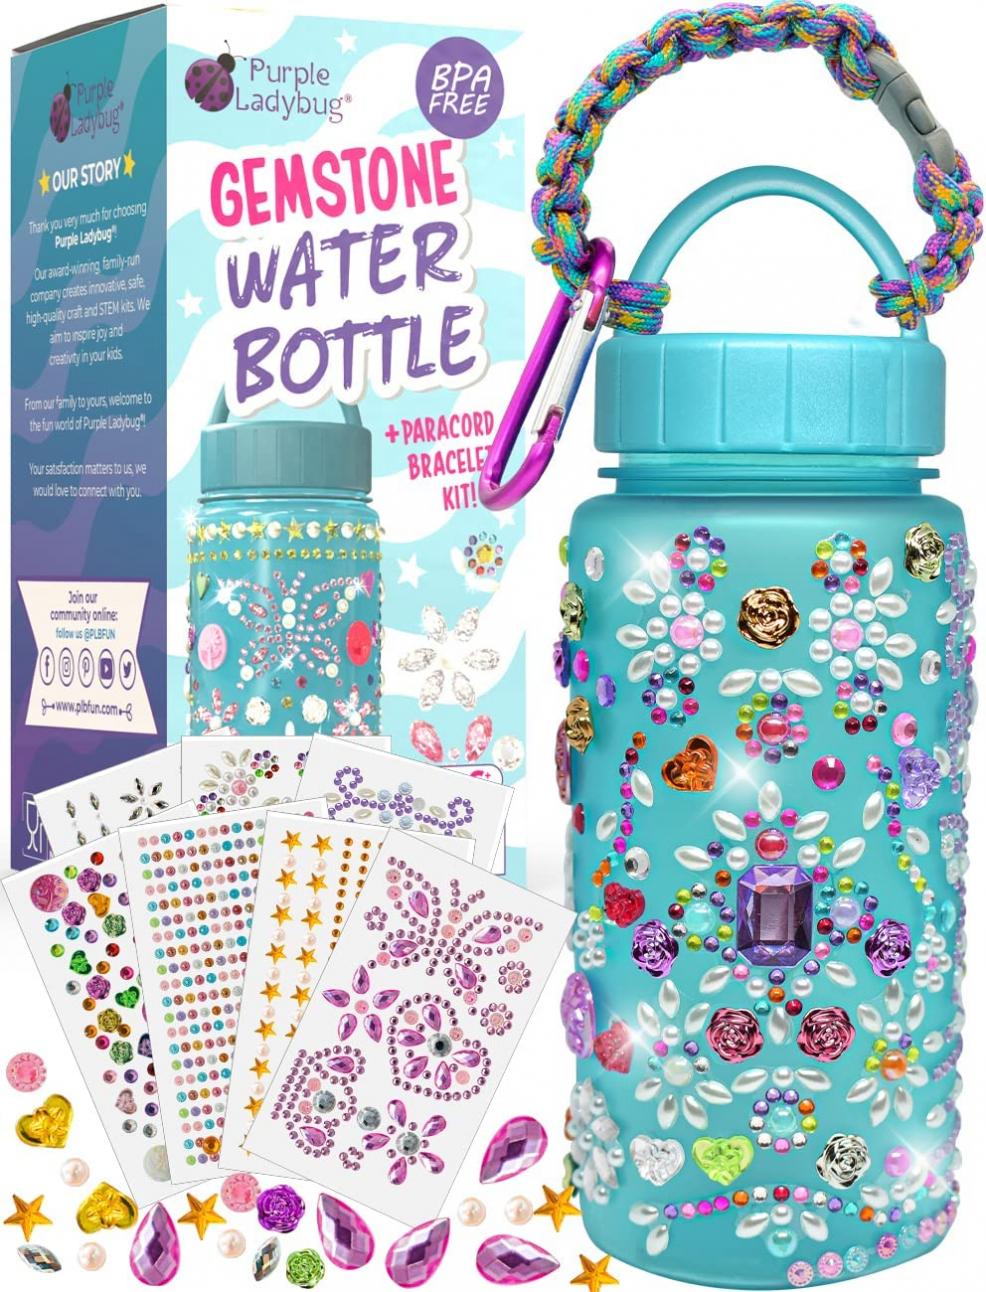 PURPLE LADYBUG Decorate Your Own Water Bottle for Girls DIY Kits - Cool Arts and Crafts for Kids Ages 6-8 & Craft Kits for Girls Ages 10-12 - Little Girl Gifts or 6 Year Old Girl Birthday Gift Idea